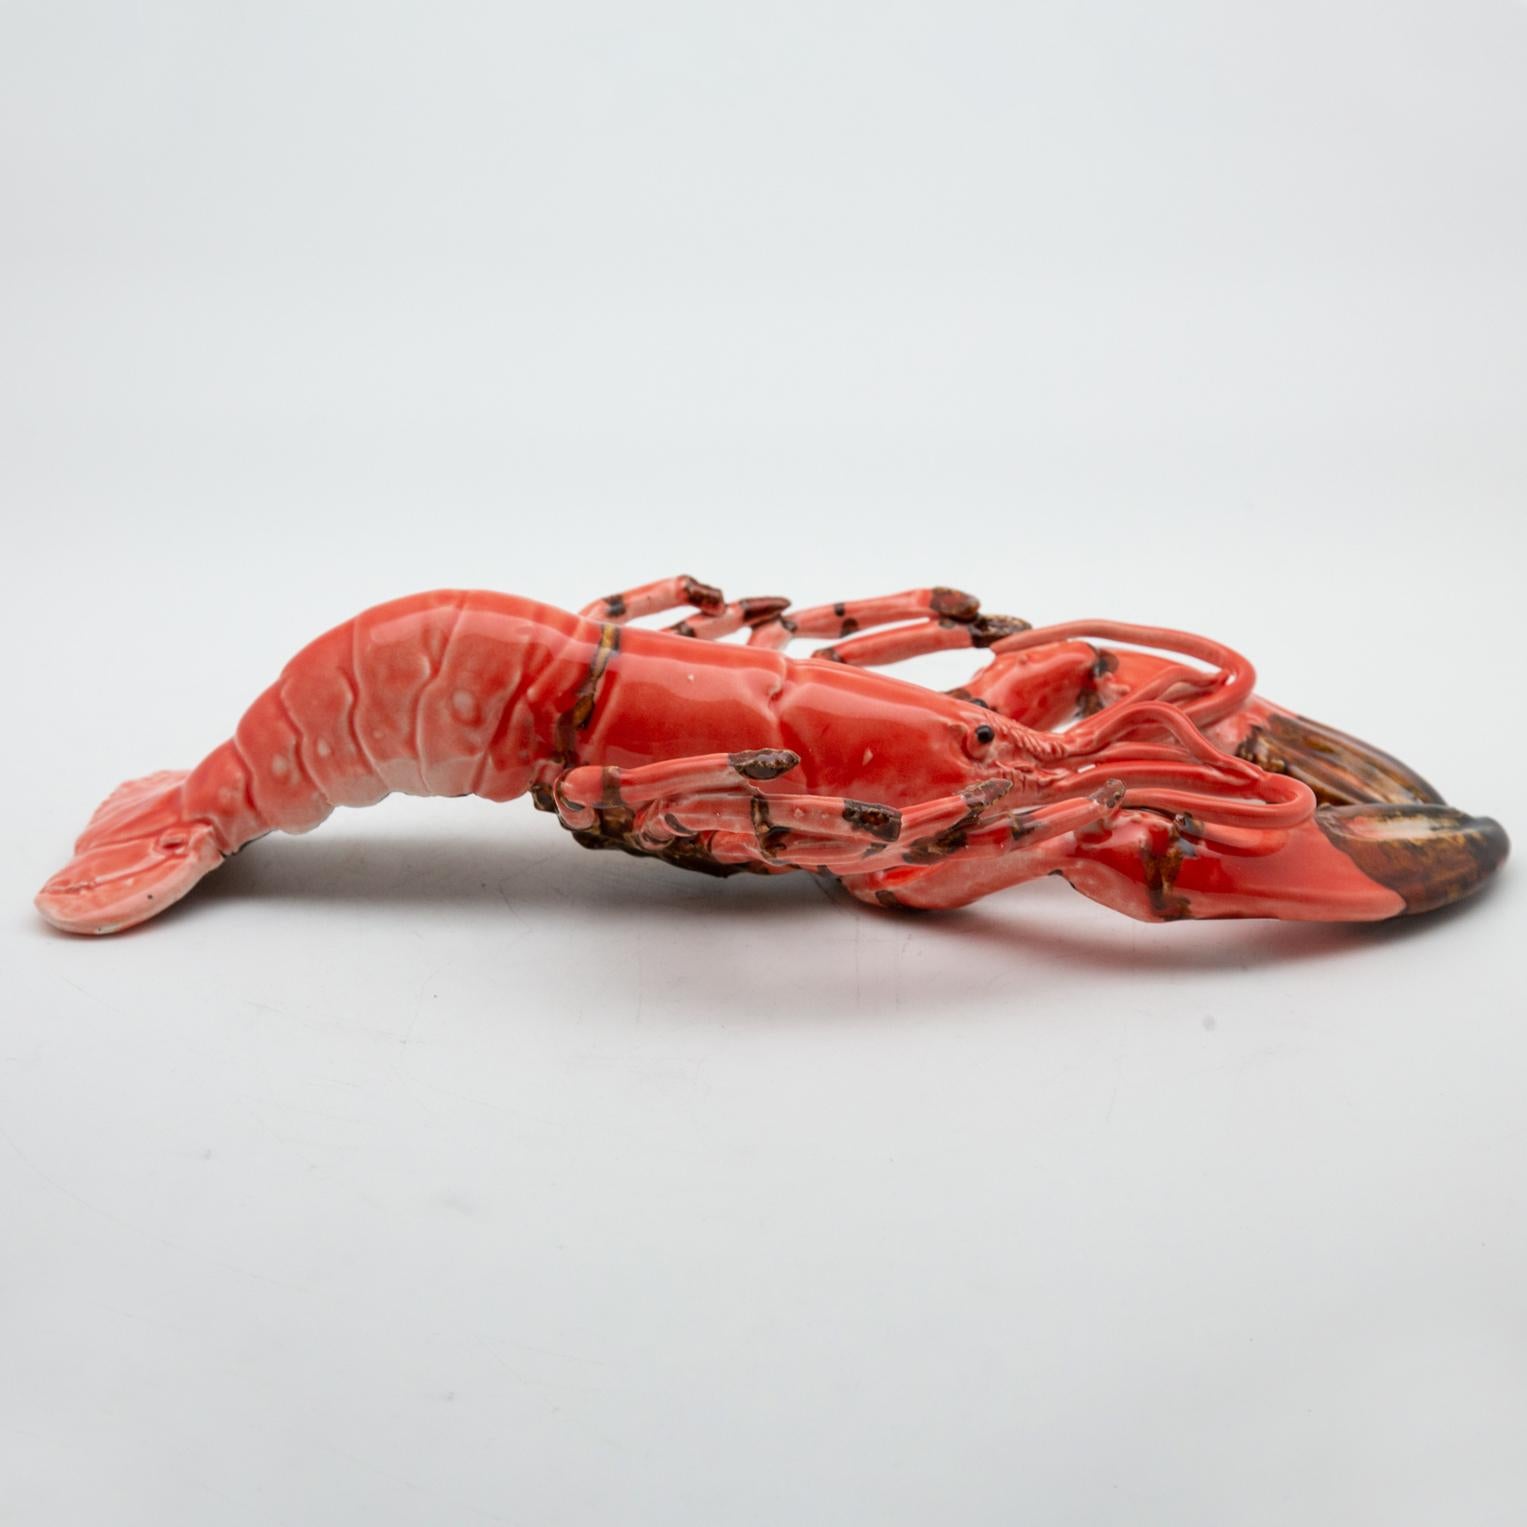 Portuguese handmade Pallissy or Majolica coral lobster chick

Ceramic sea life art has long been a tradition in Portugal. It was inspired by the 